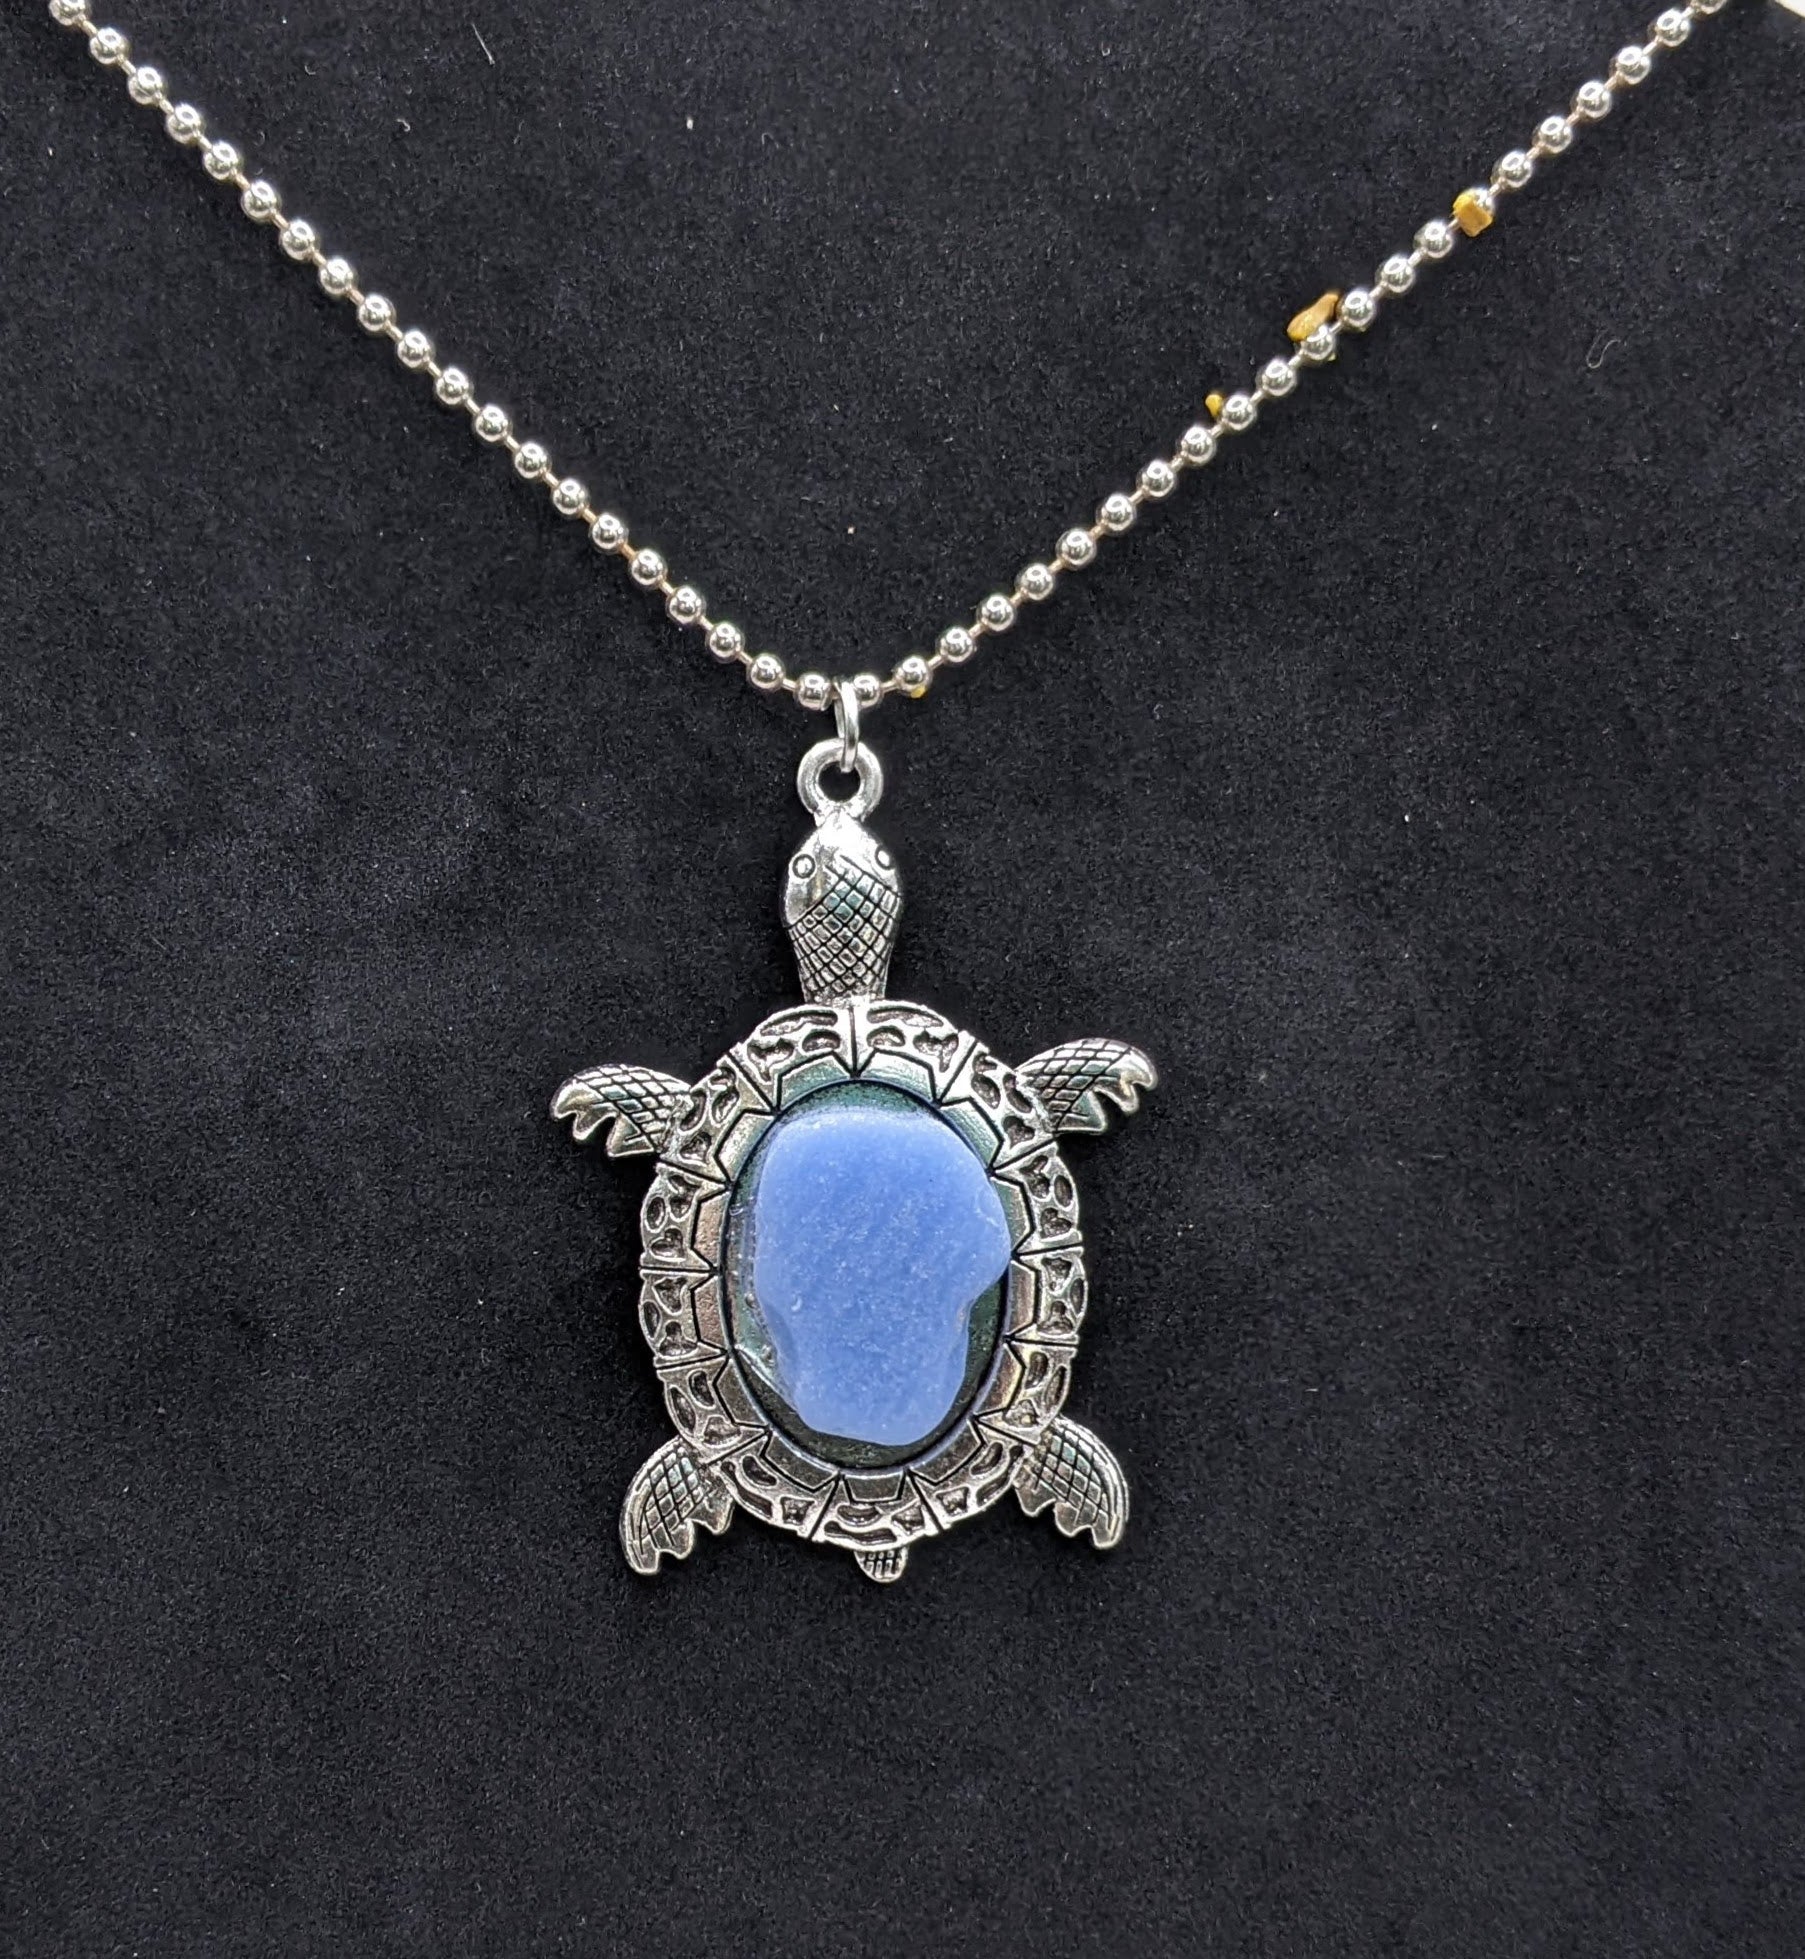 Silver turtle pendant with blue tile